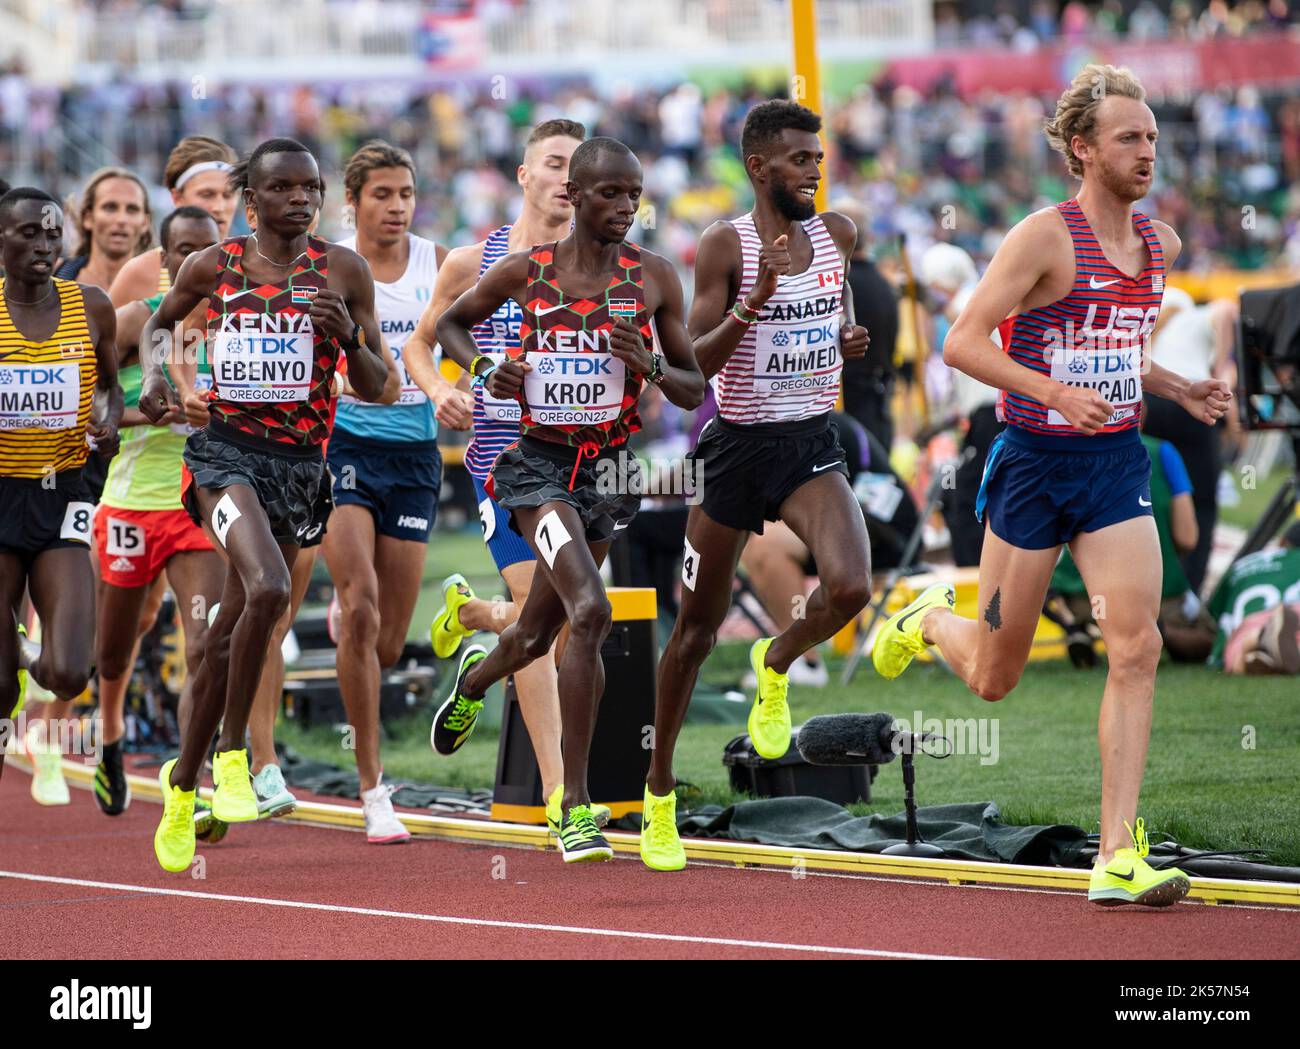 Jacob Krop of Kenya competing in the men’s 5000m heats at the World Athletics Championships, Hayward Field, Eugene, Oregon USA on the 21st July 2022. Stock Photo